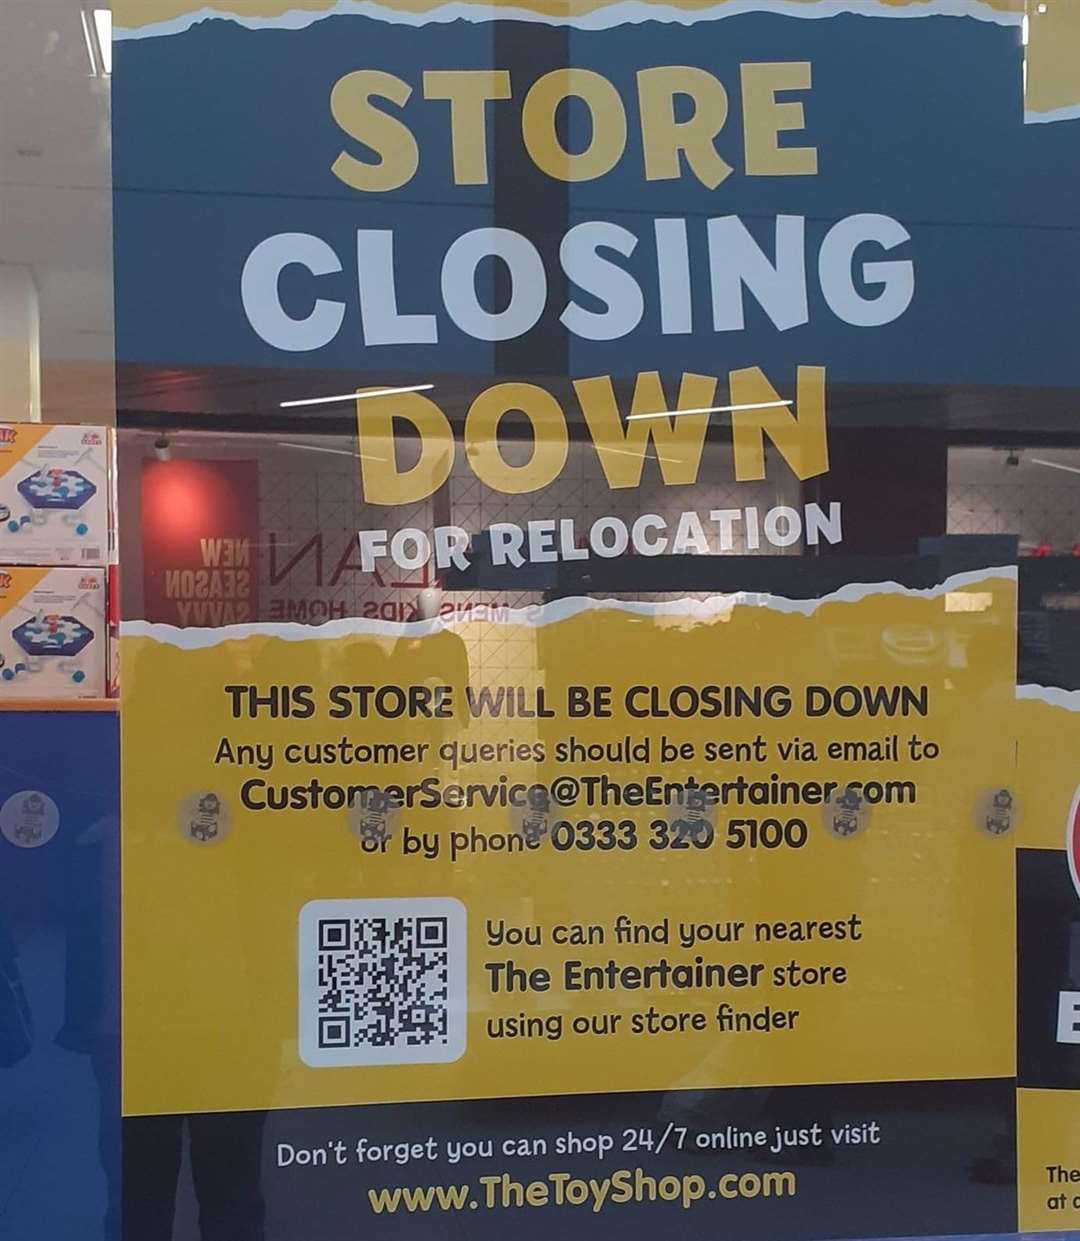 Originally signs said that the shop would be closing "for relocation"